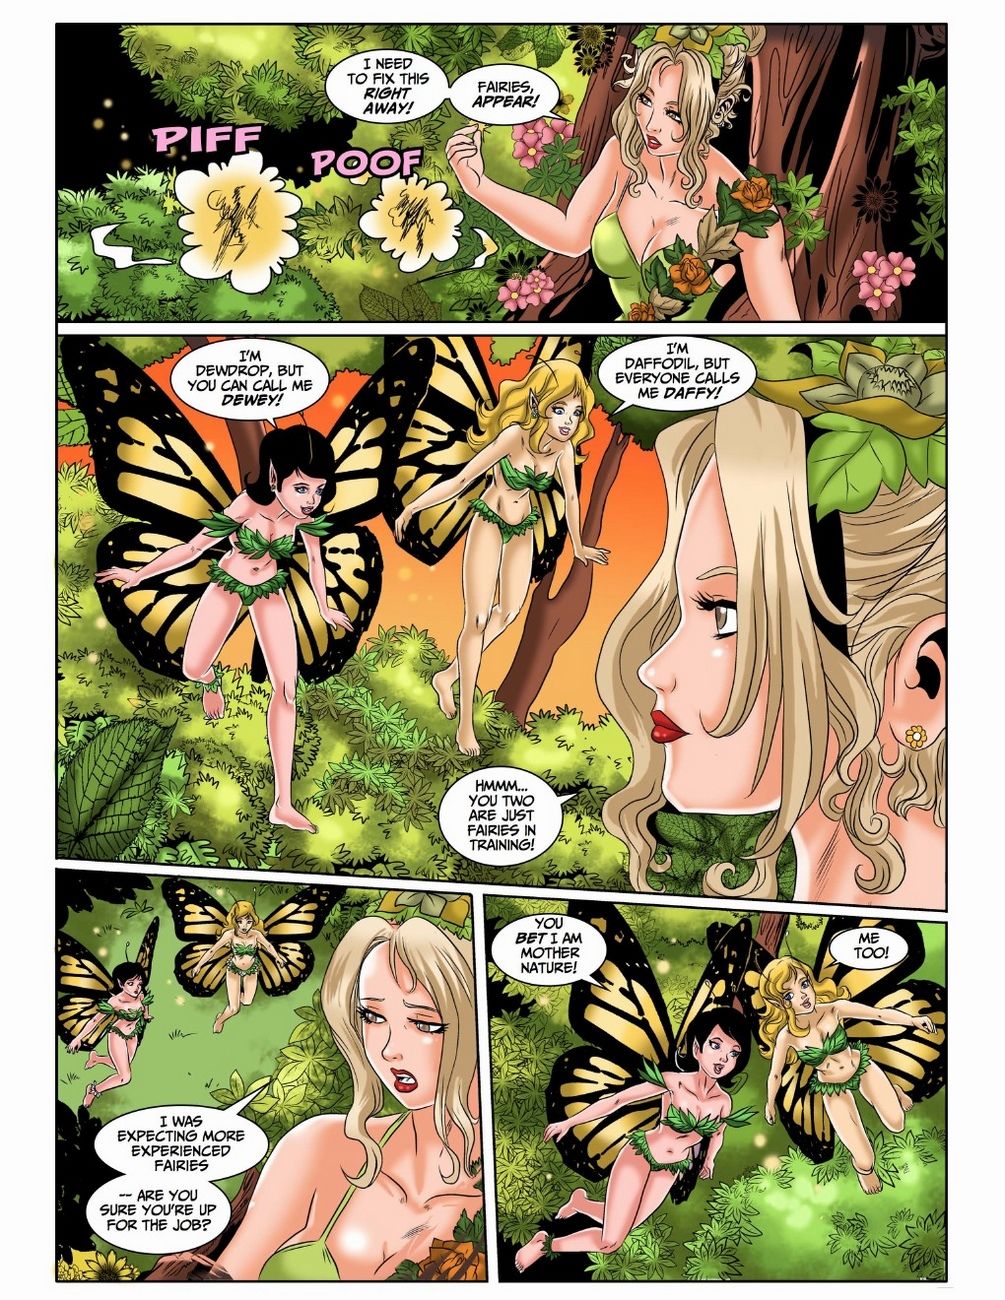 The Puberty Fairies 1 page 7